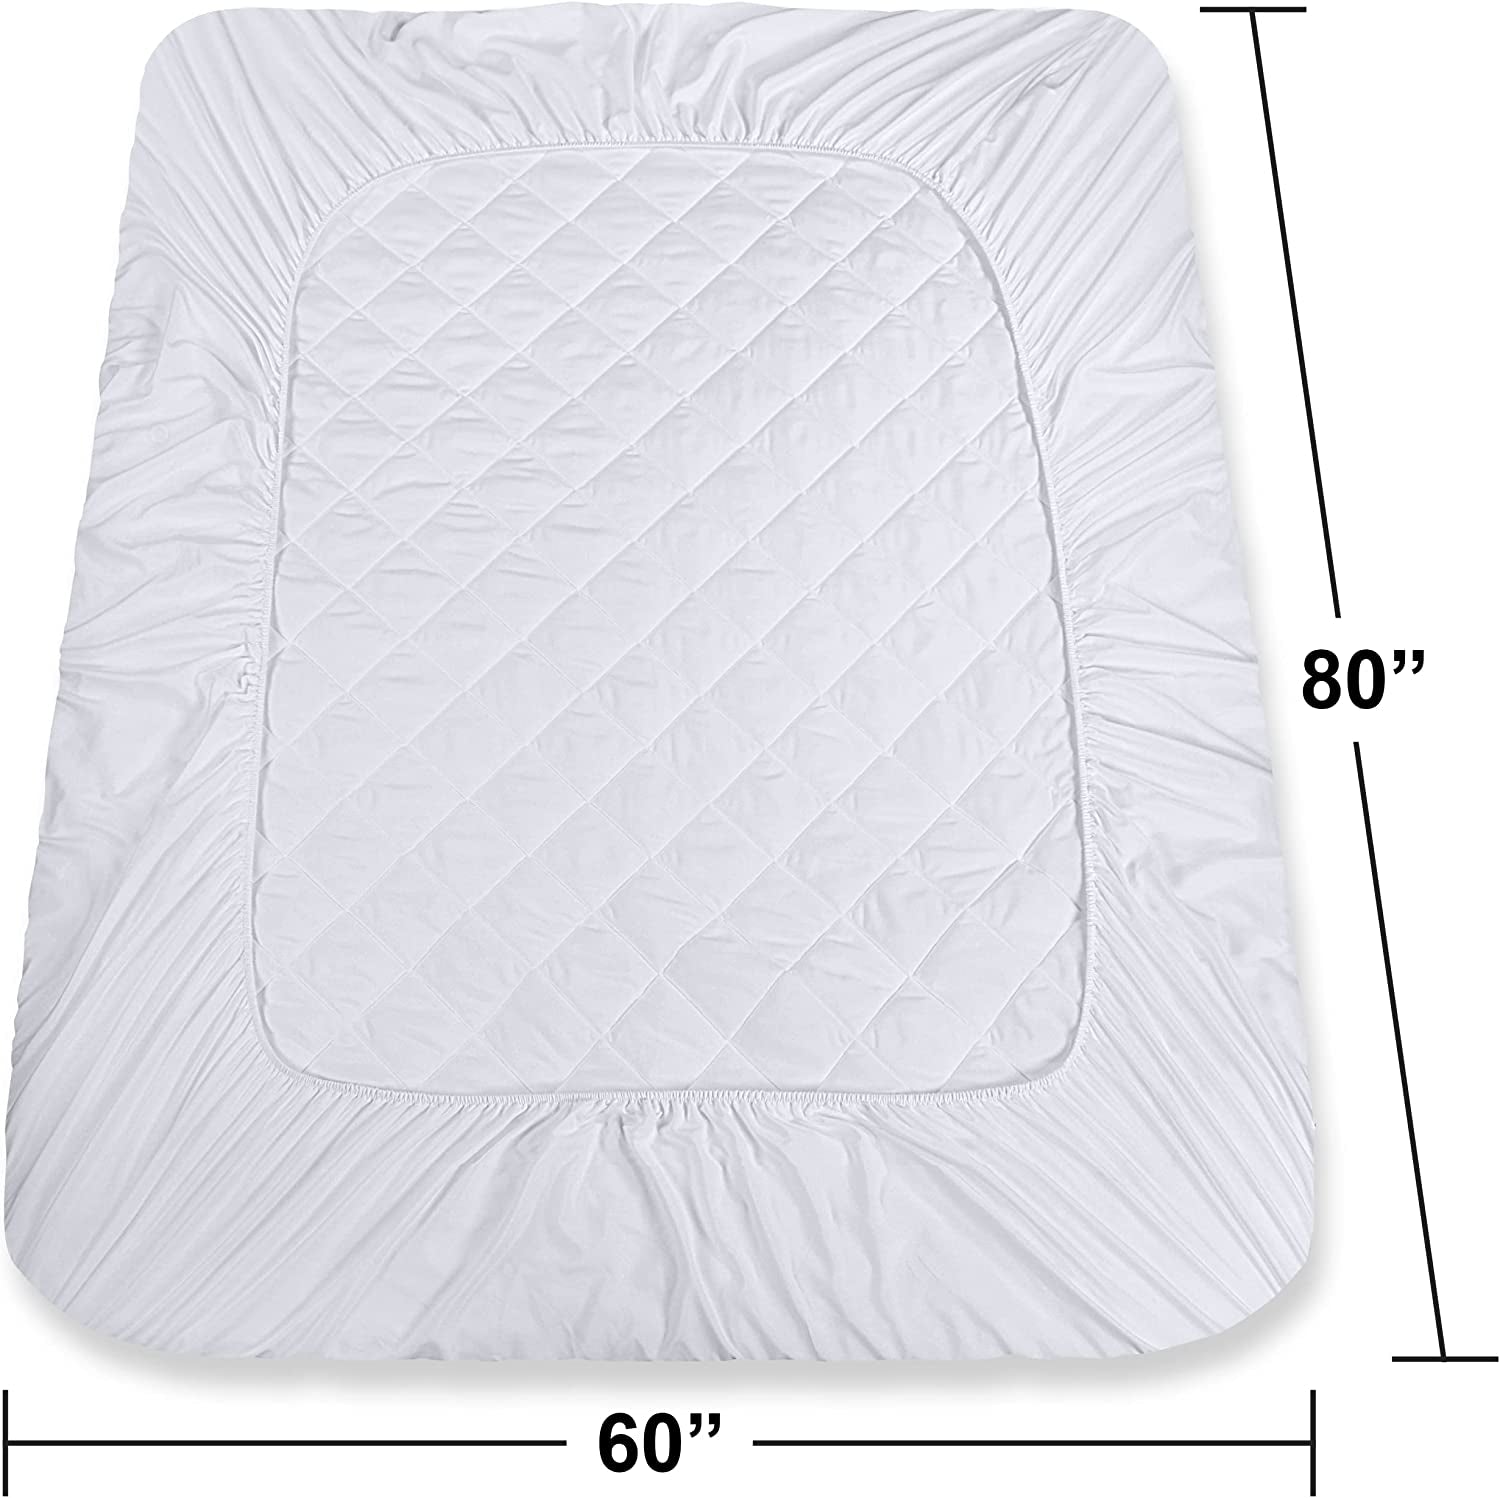 Queen Mattress Pad - Quilted, Fitted, Machine Washable, 60x80 inches